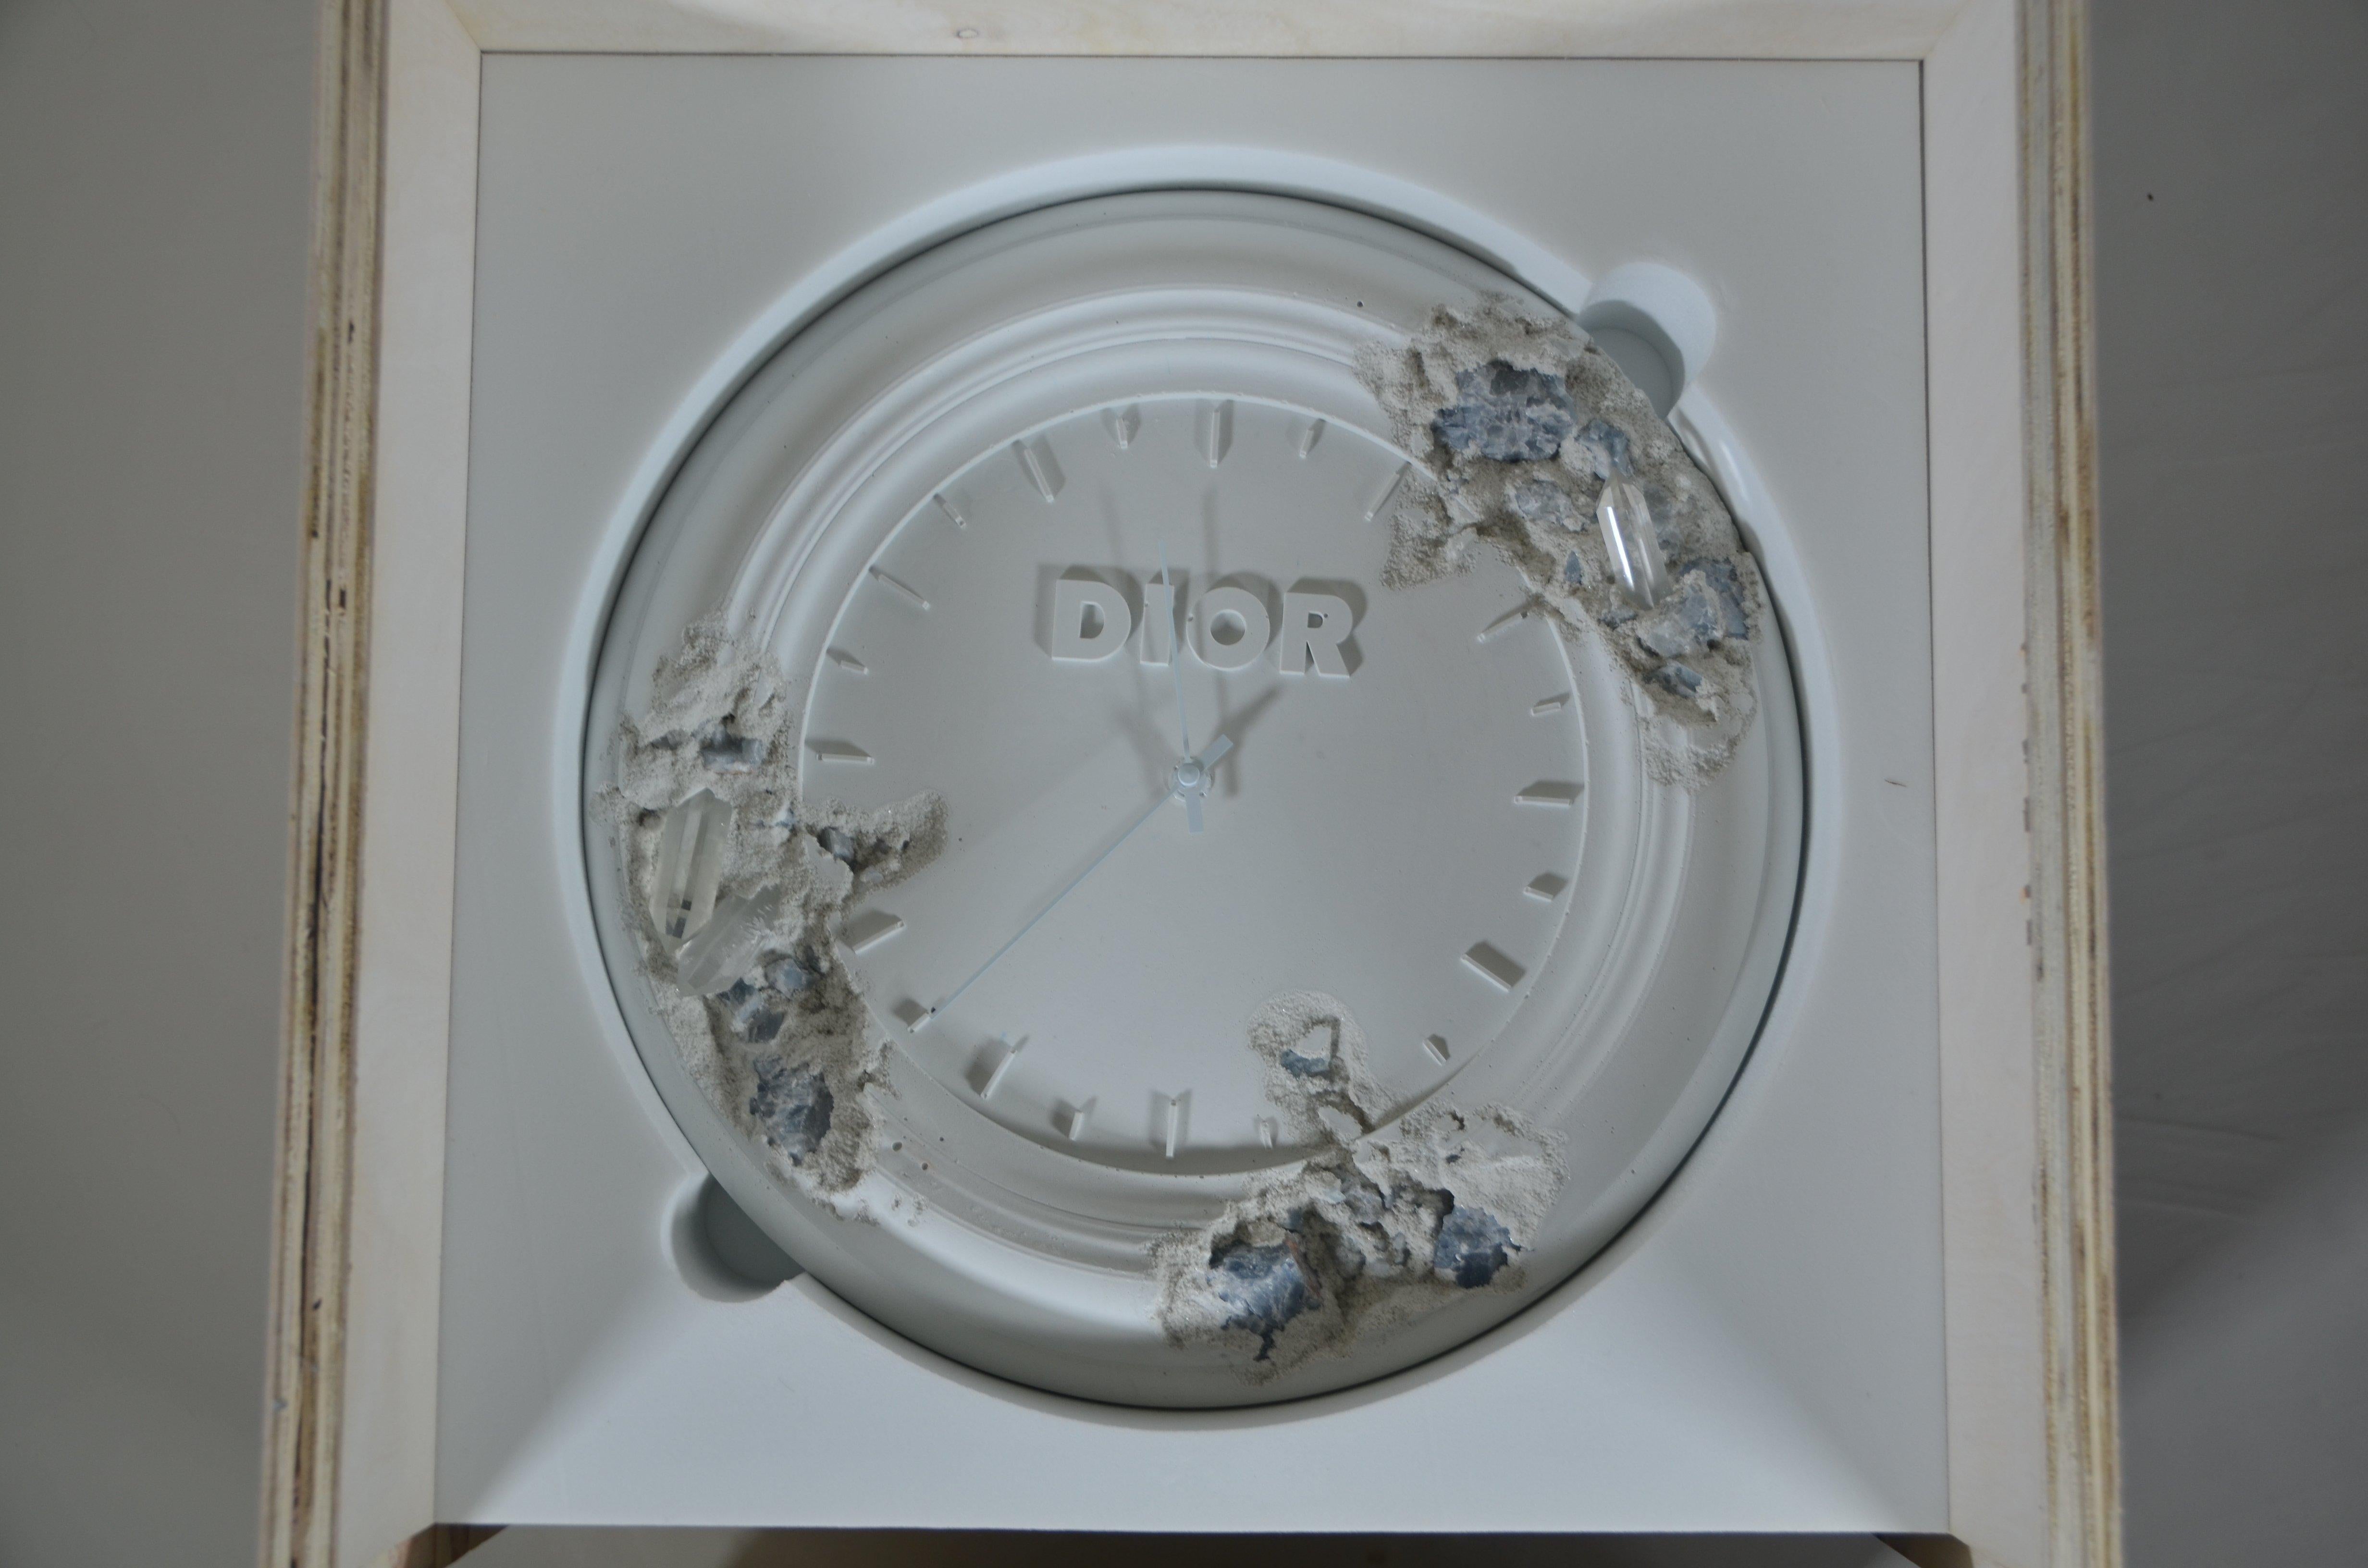 Summer 2020 Men’s show, Daniel Arsham has transformed Christian Dior’s atelier clock into a functional sculpture.  
Eroded in several places as if ravaged by time, this veritable work of art emblazoned with the Dior signature reveals cracks pierced